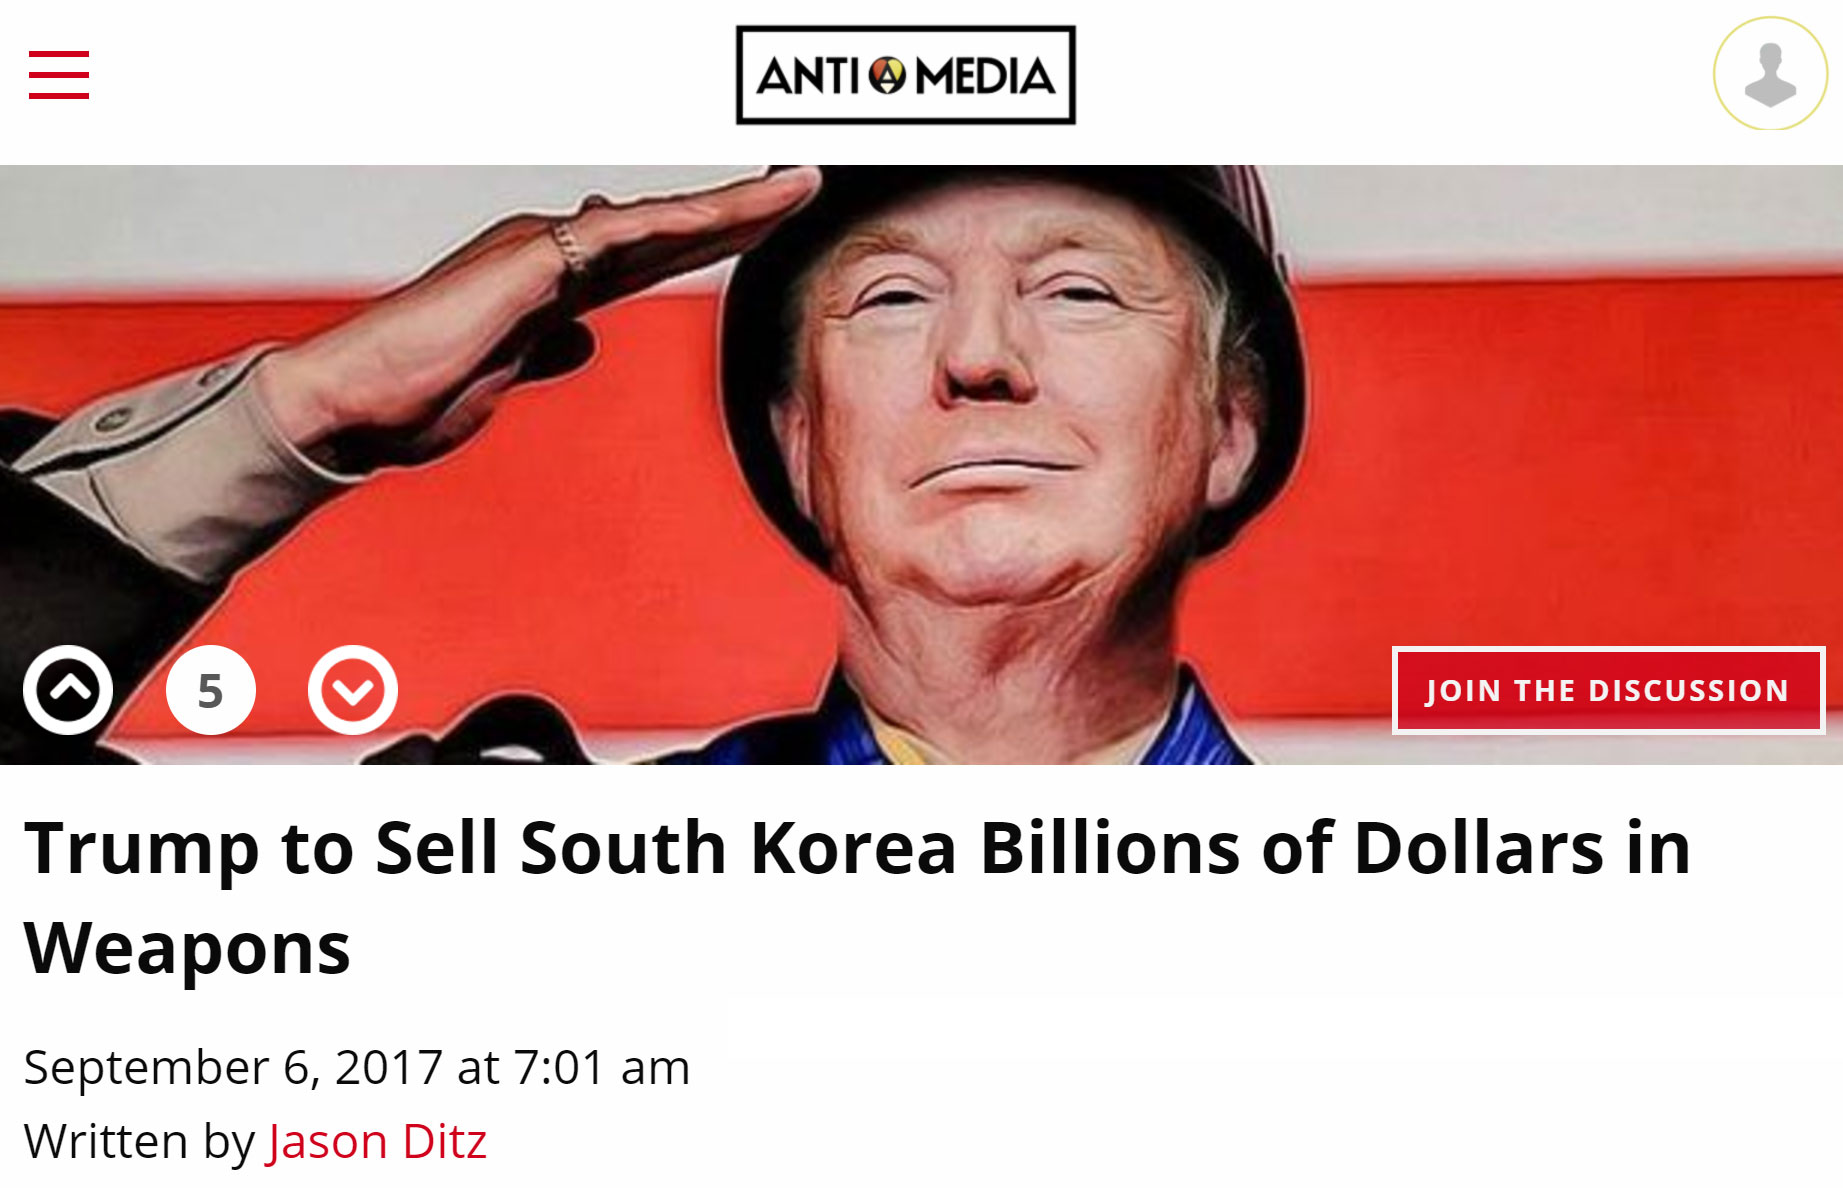 2-Trump-to-Sell-South-Korea-Billions-of-Dollars-in-Weapons.jpg